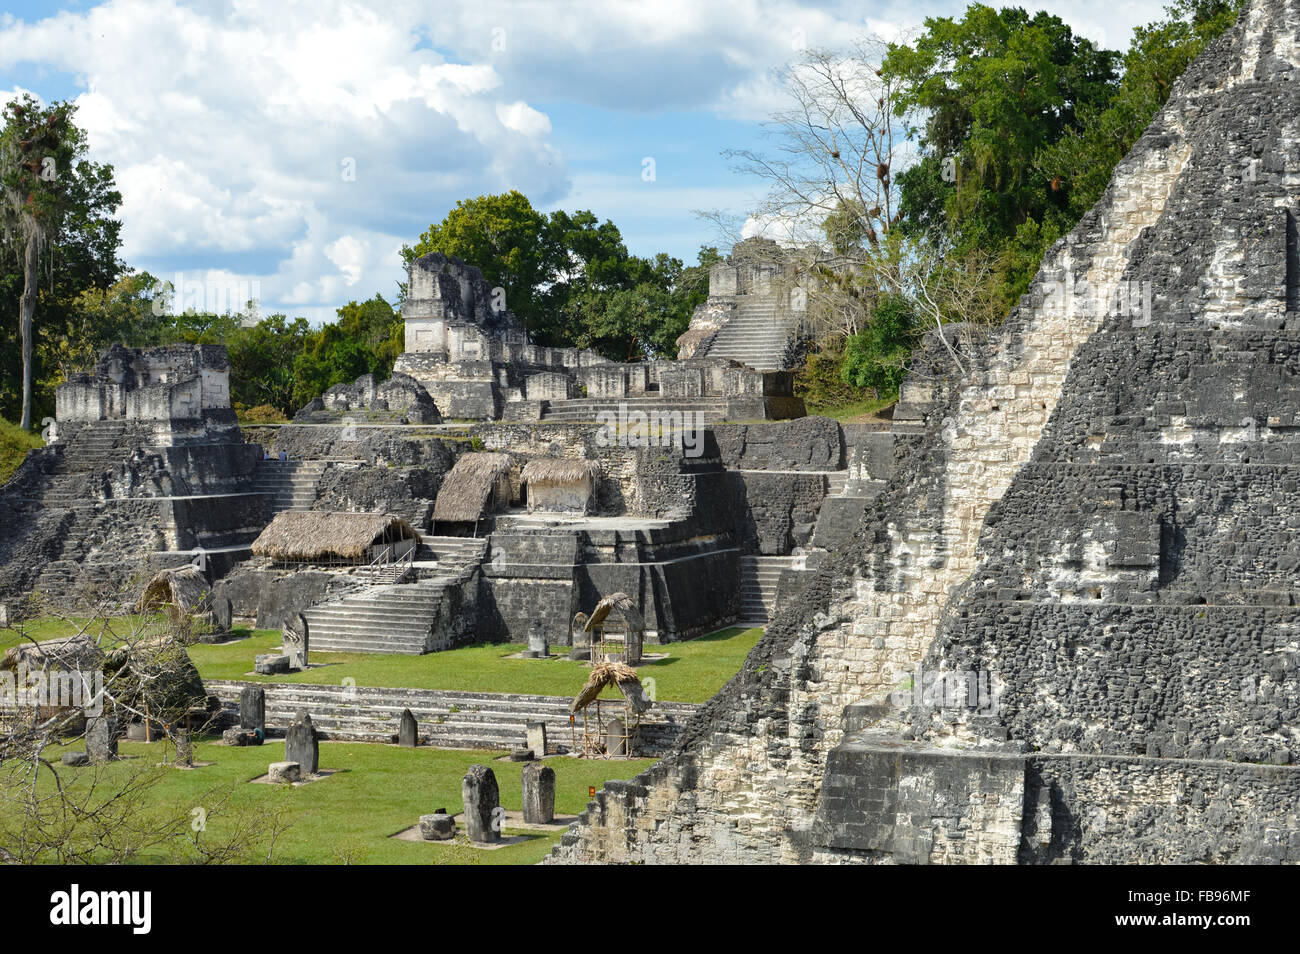 North Acropolis structures in Tikal National Park and archaeological site, Guatemala Stock Photo